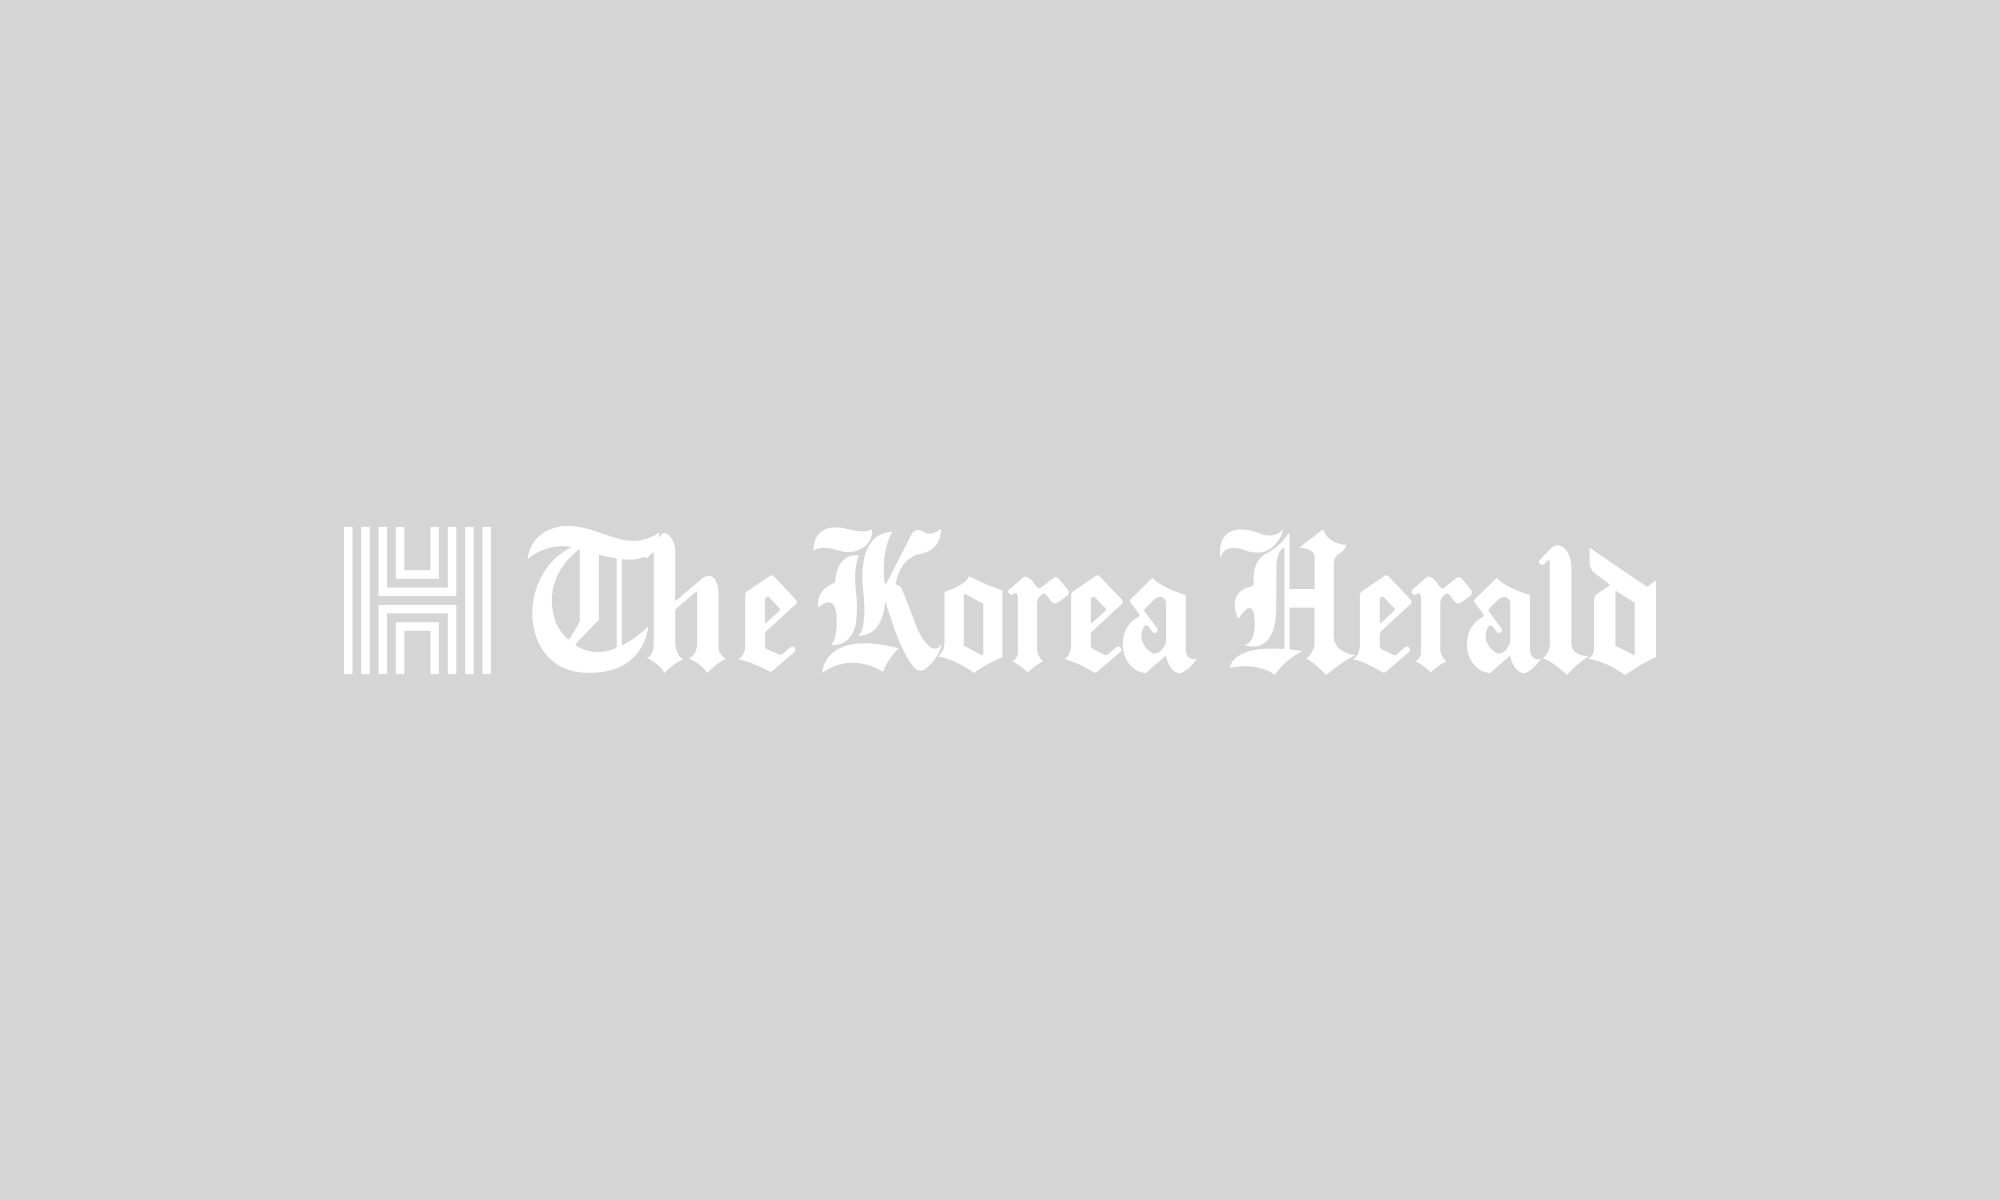 Seoul considers task force on return of artifacts